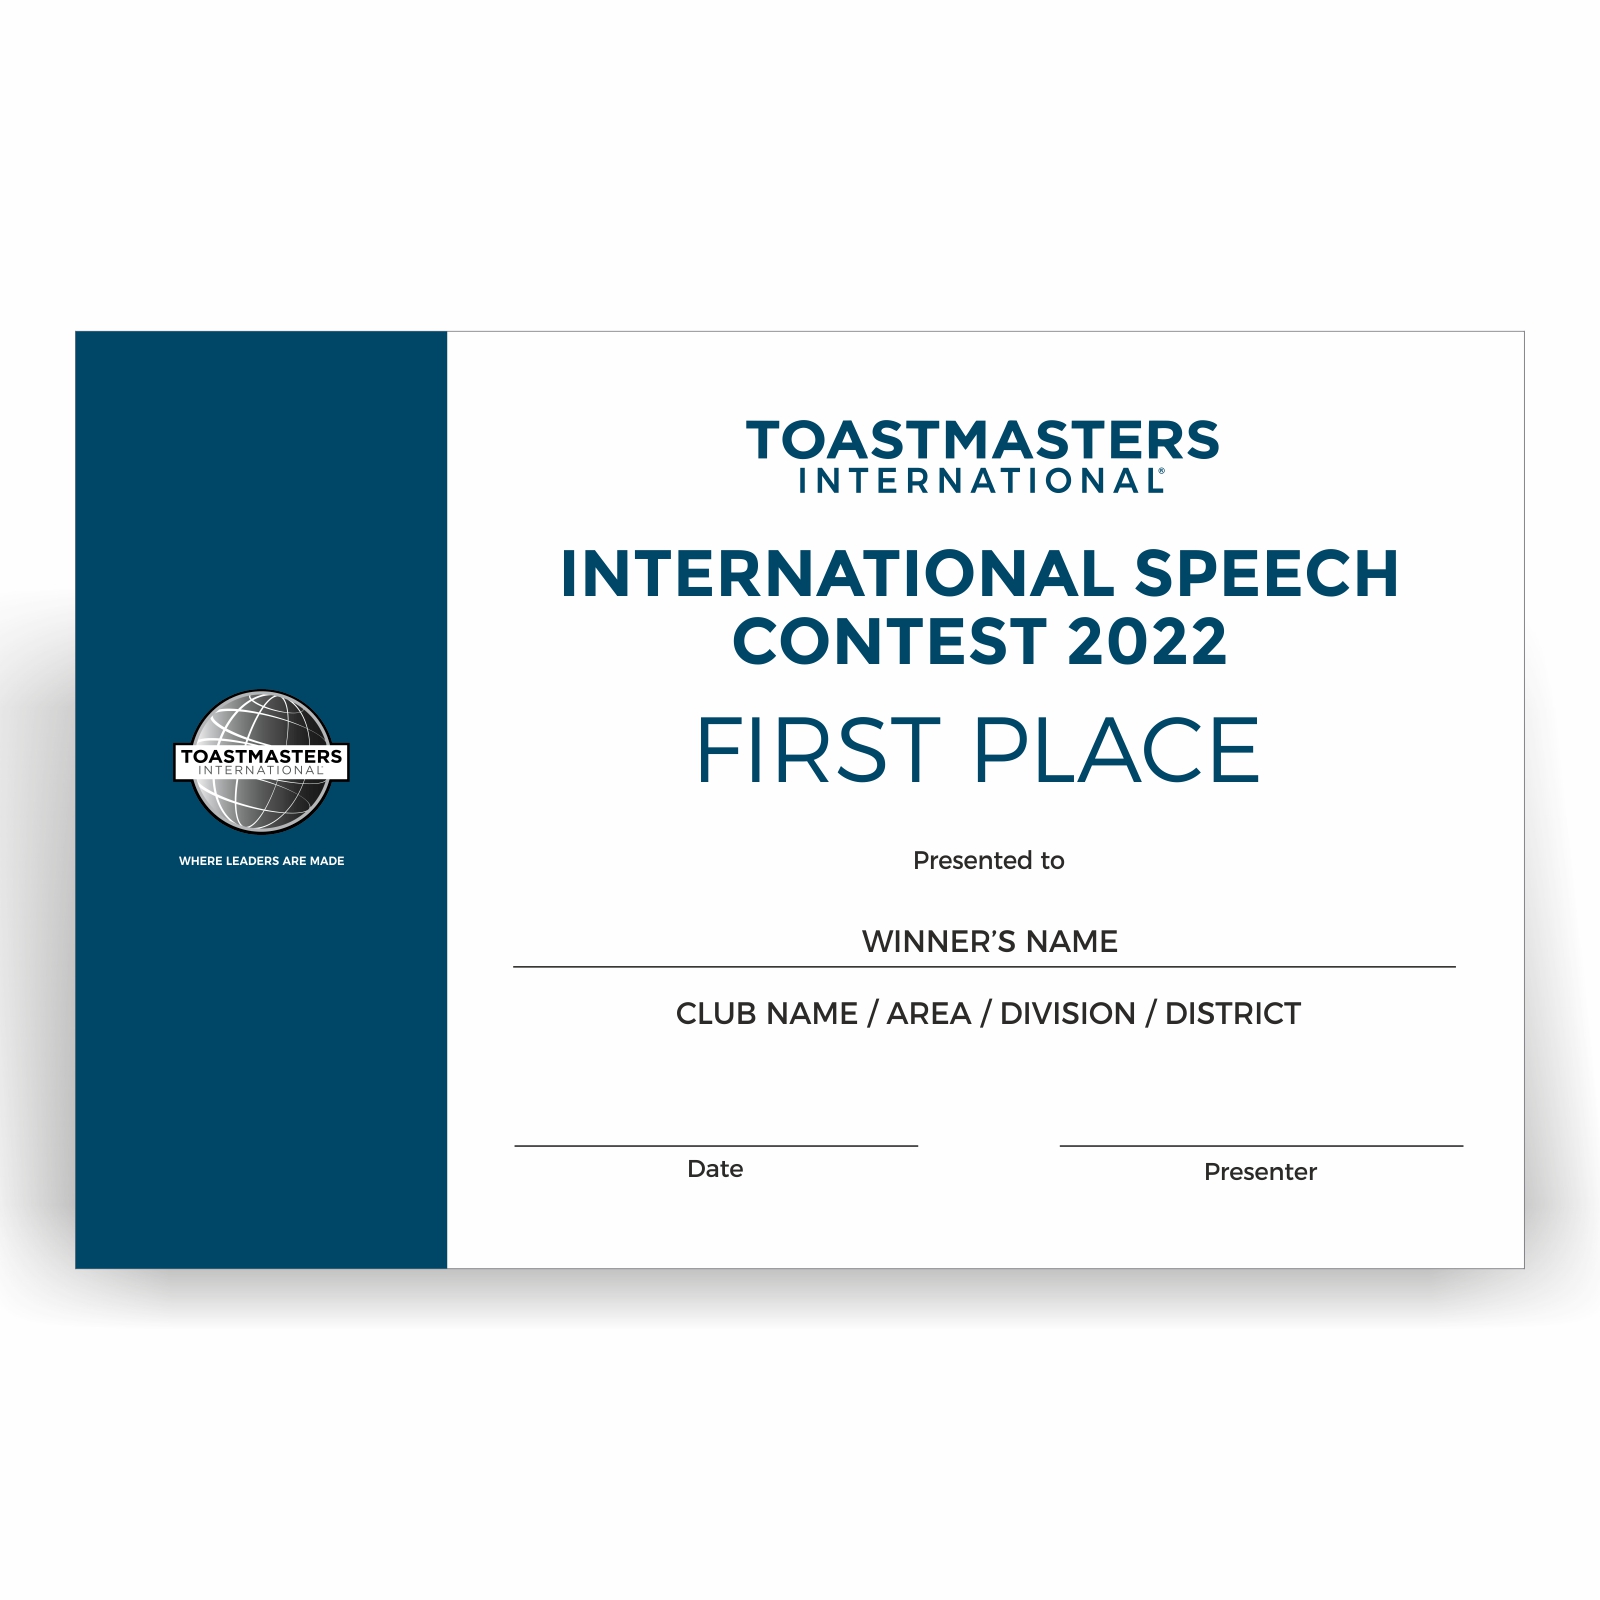 Toastmasters Contest Certificates - International Speech 1st Place - Excellence Recognized.